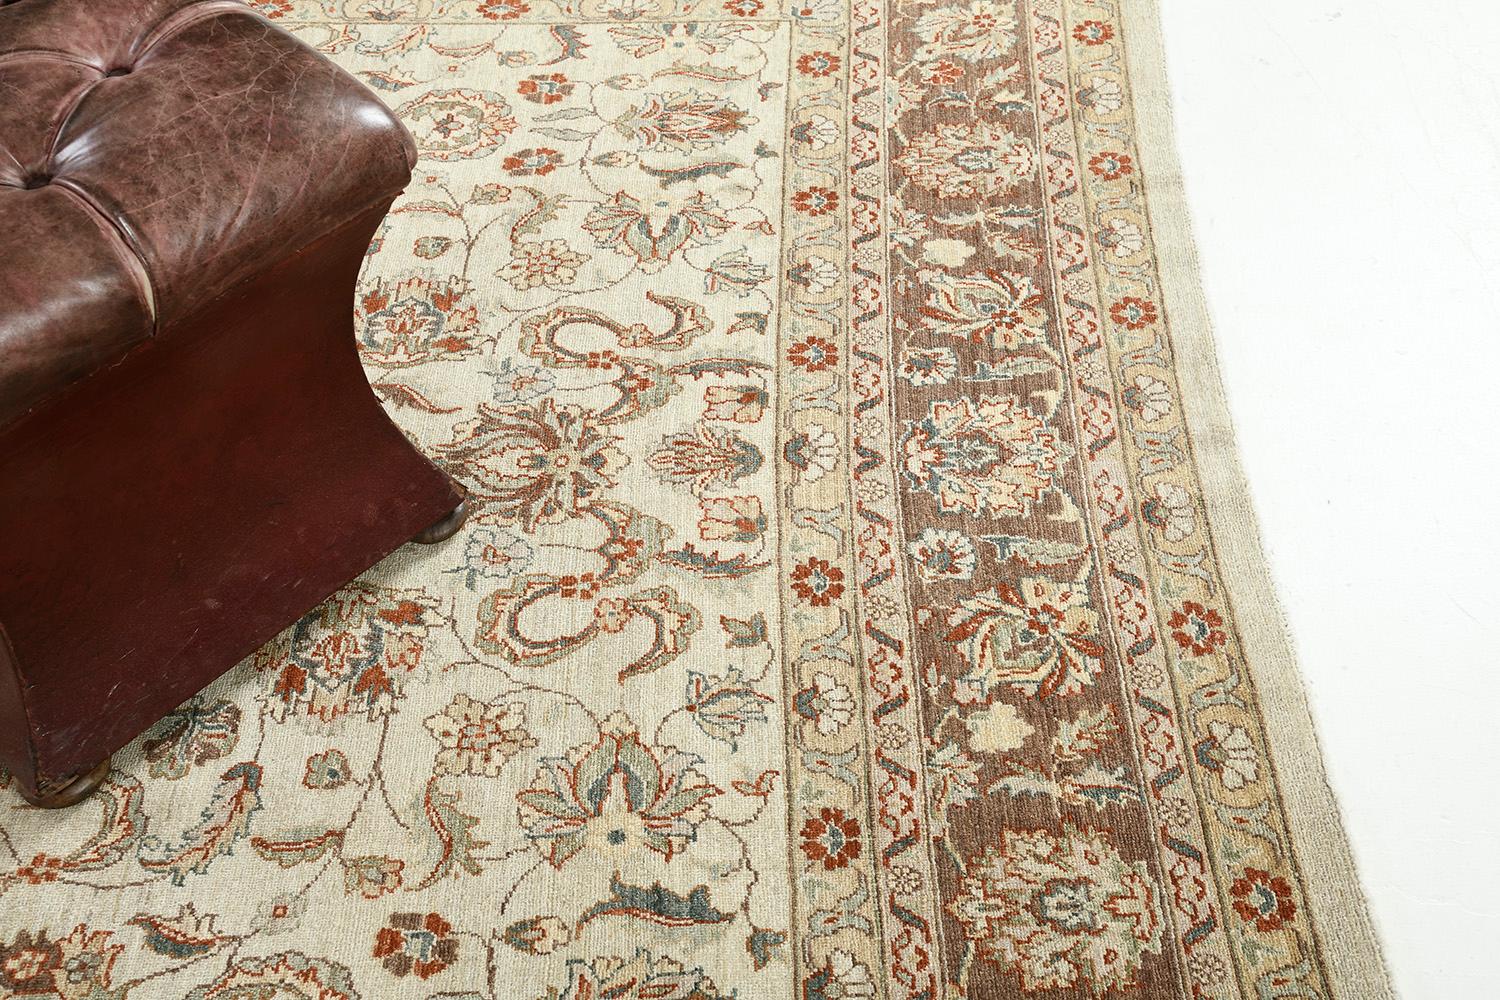 This enchanting Sultanabad Rug has symmetrical patterns that make the rug unique. A one of a kind rug that makes your interior more fascinating. Earthy tones feature even the smallest details of the patterns and motifs that match with the red